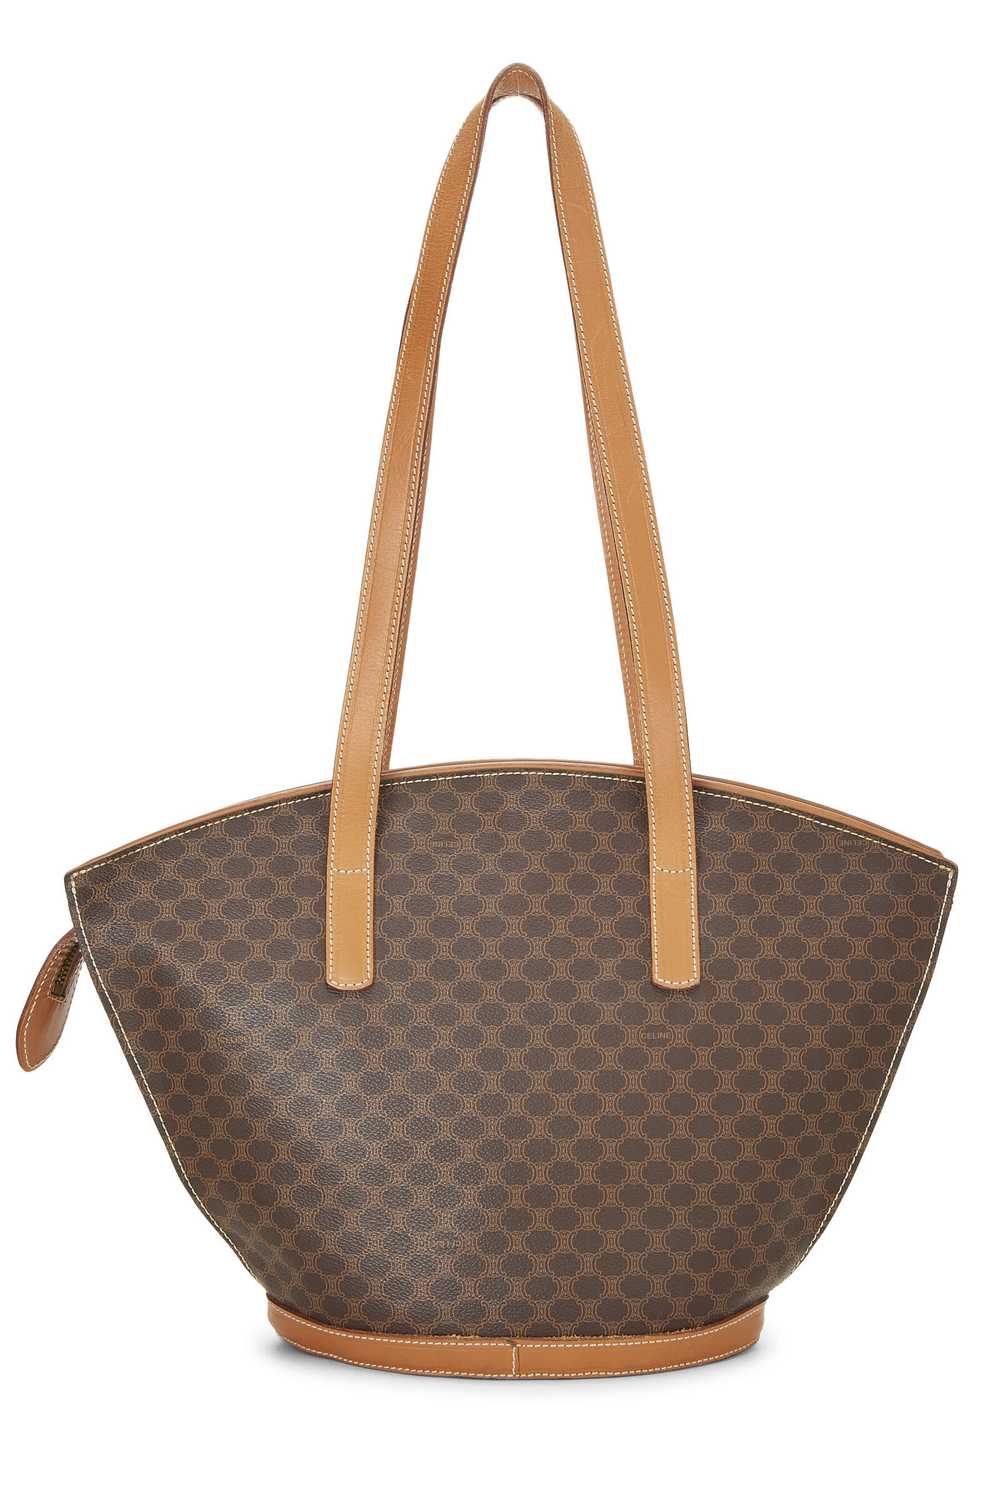 Brown Coated Canvas Macadam Tote - image 4